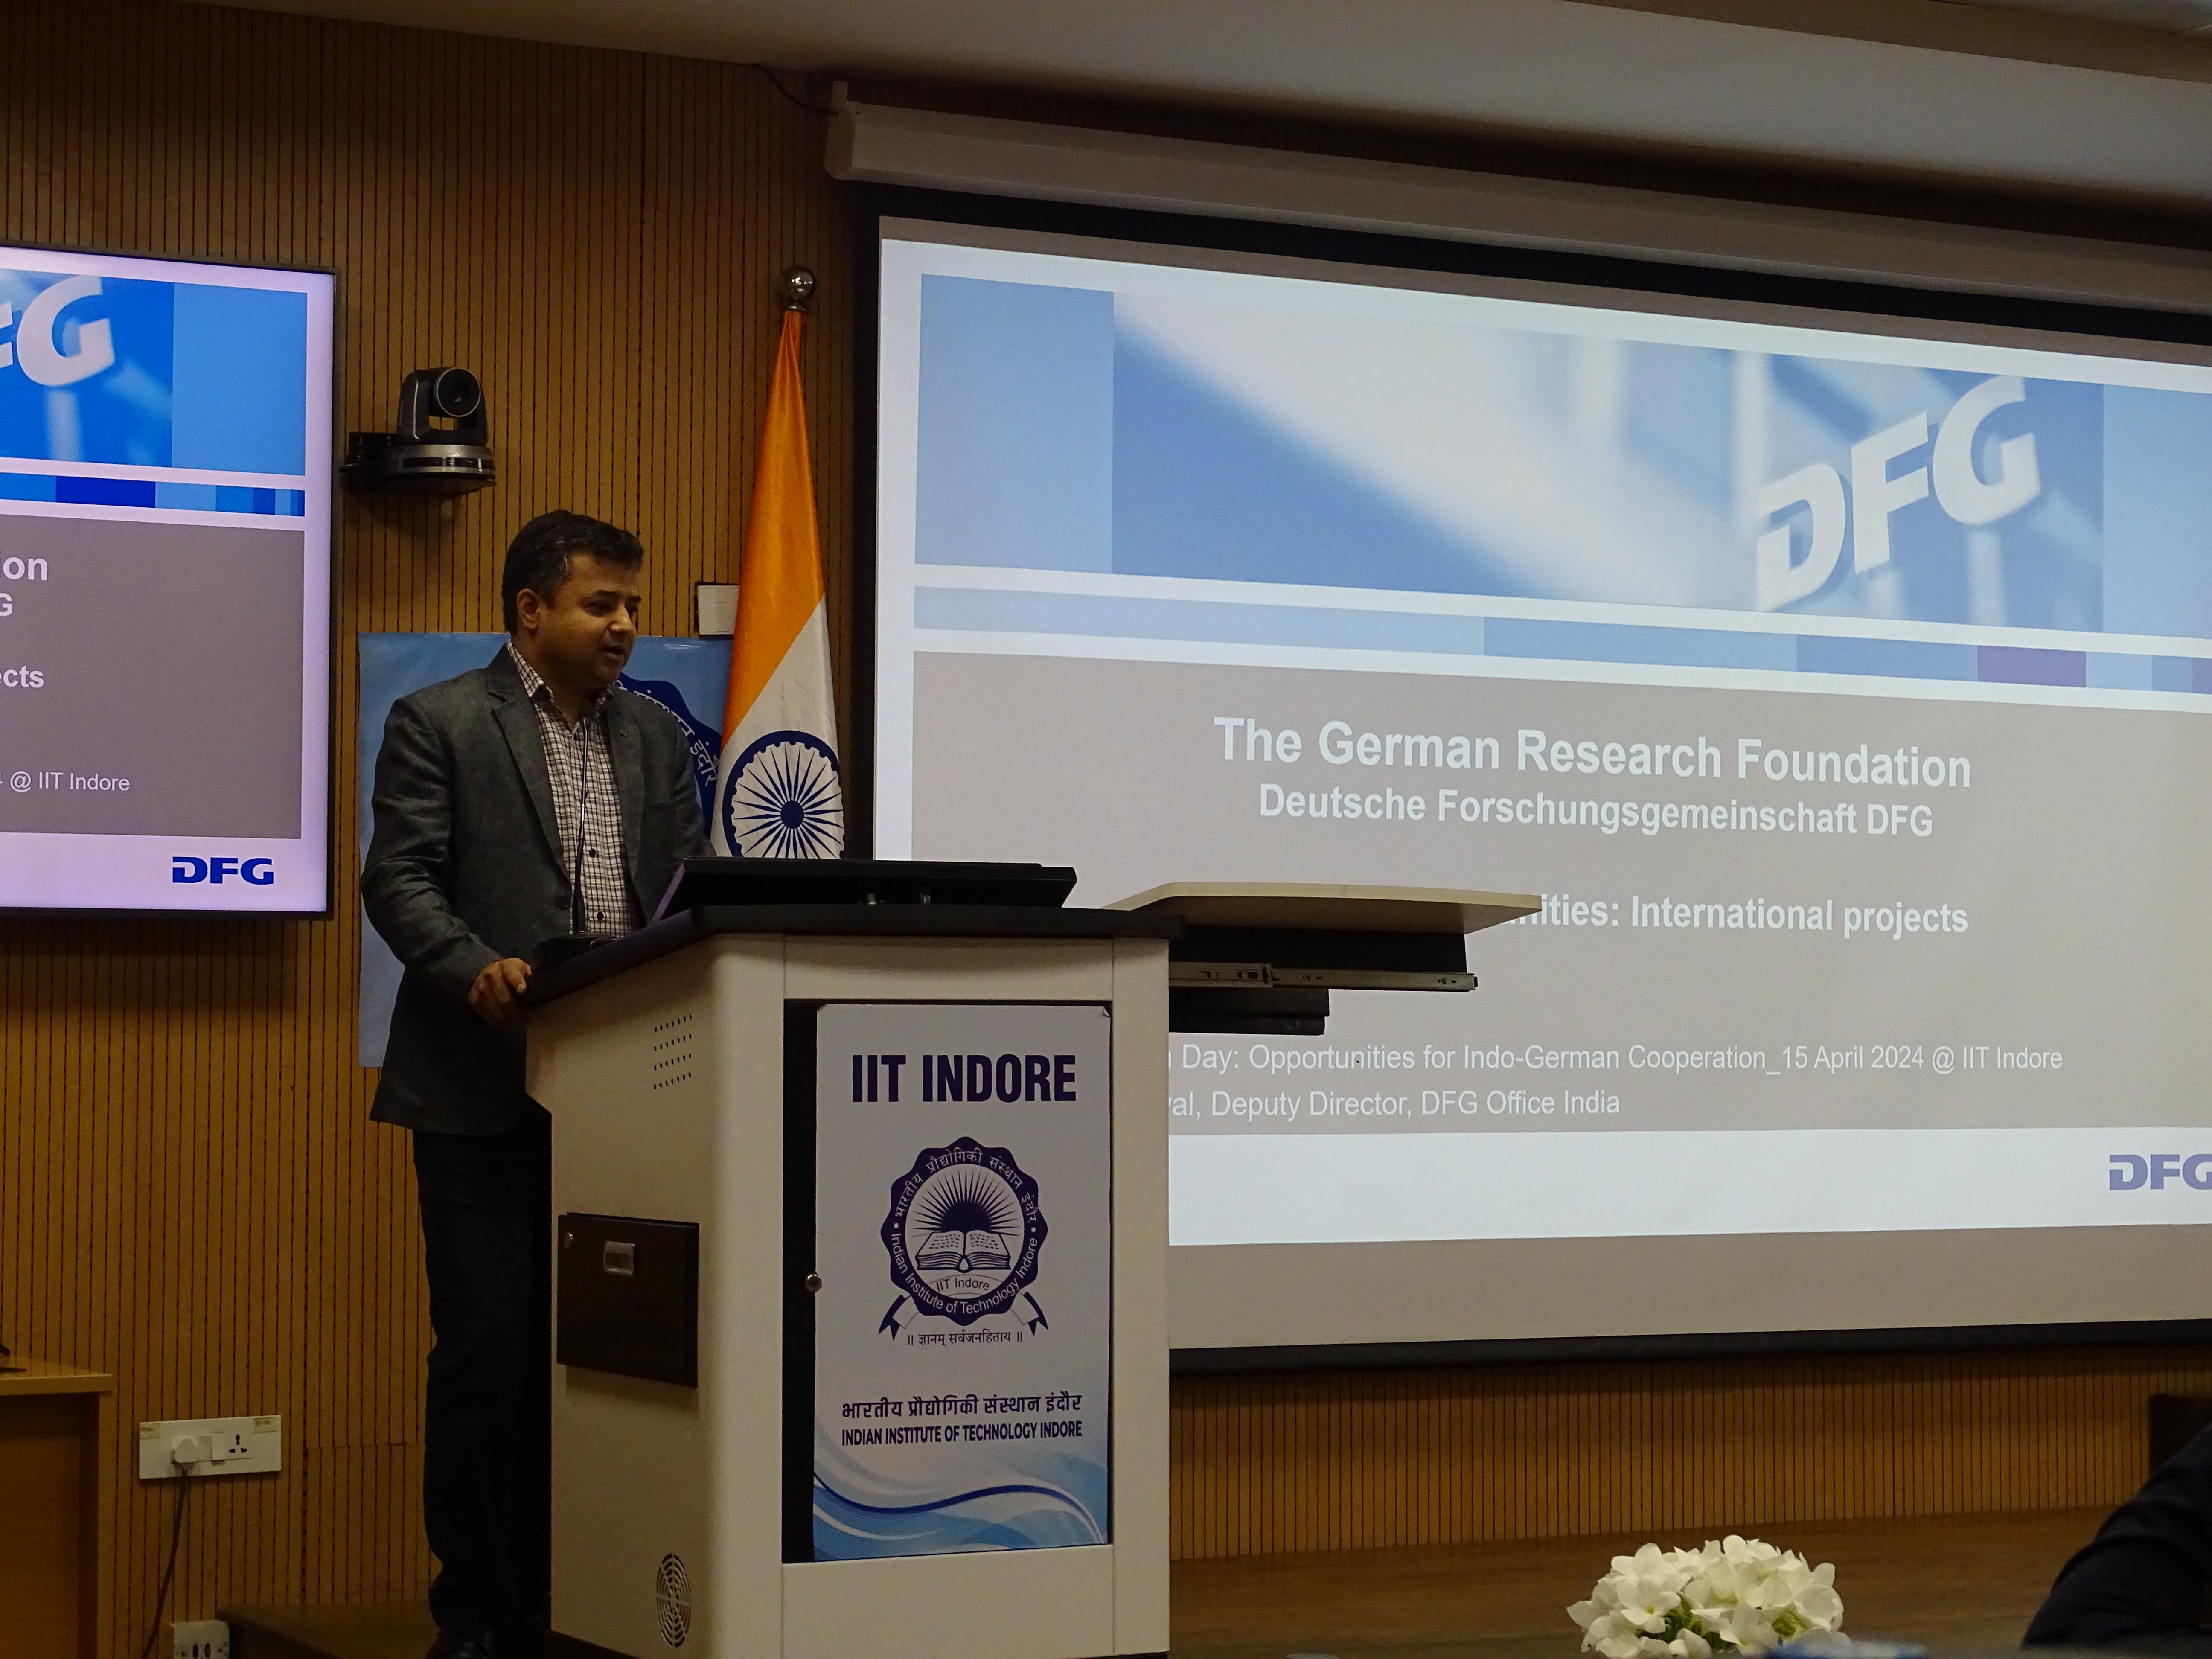 Impressions of IIT Indore: Dr. Vaibhav Agarwal